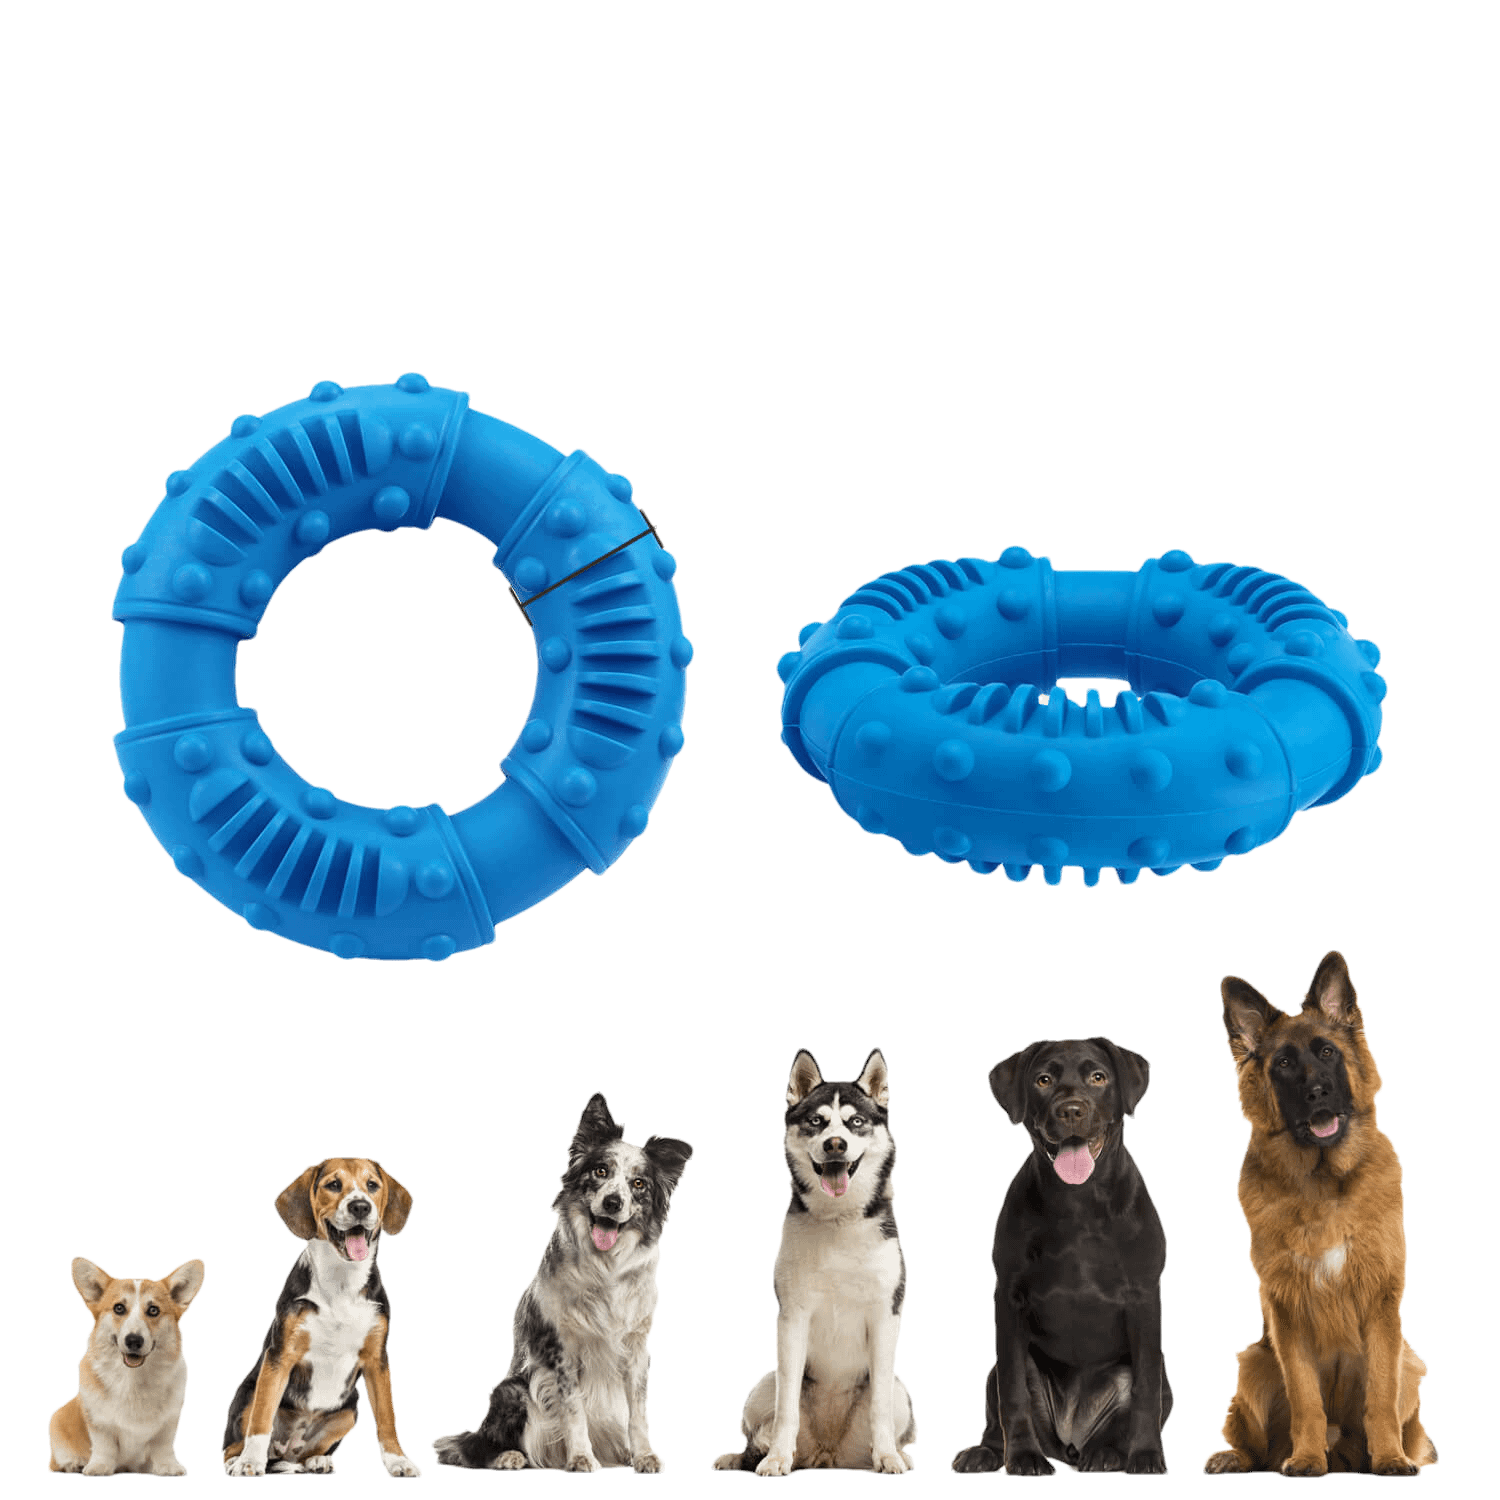 Dogs Chew Toys